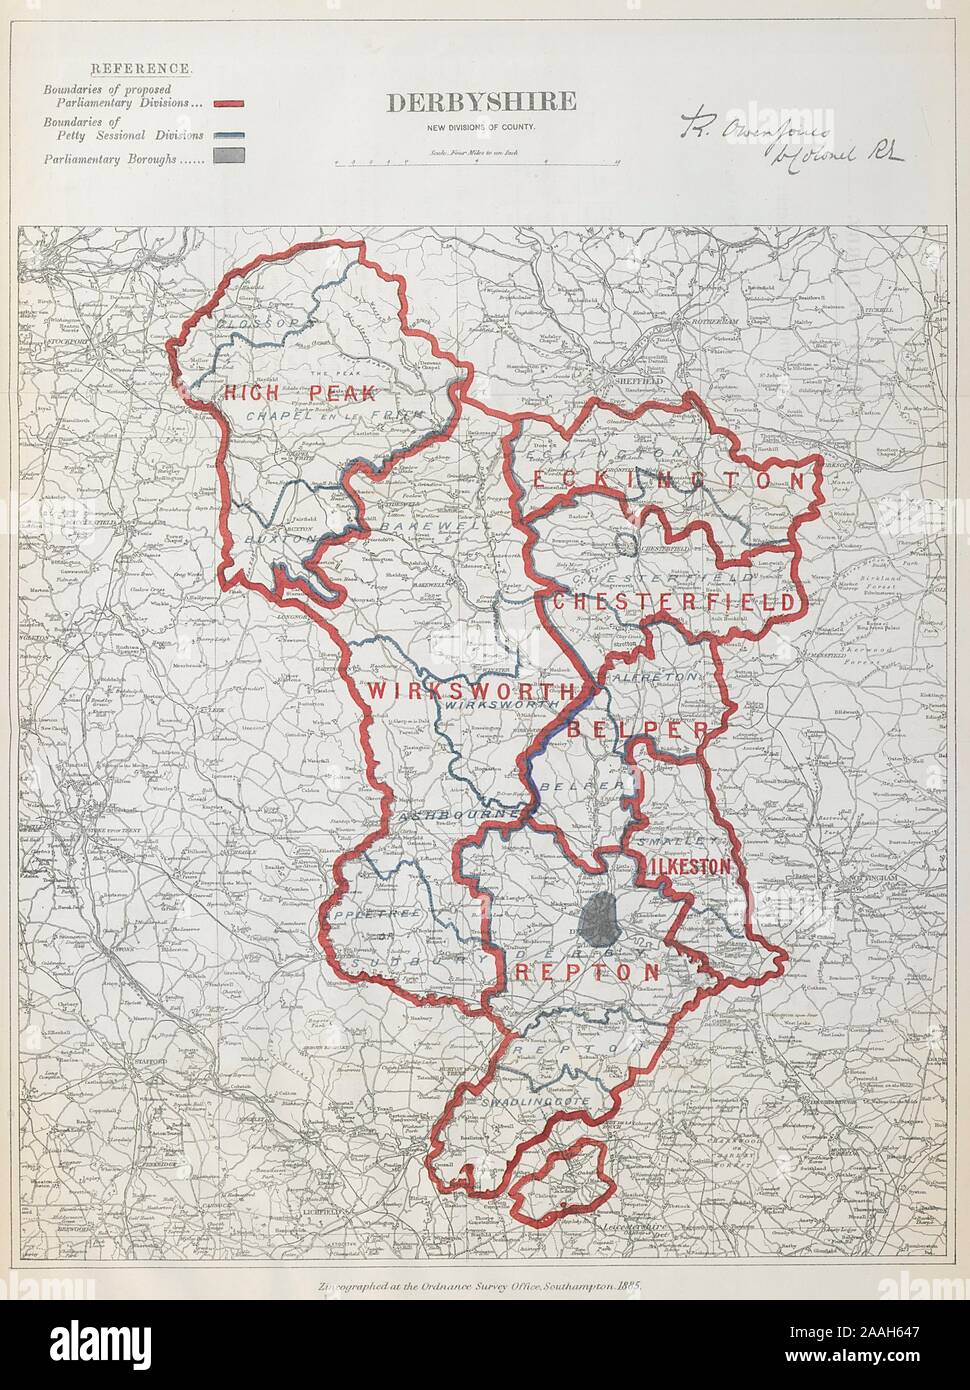 Derbyshire Parliamentary Divisions. Repton Belper. BOUNDARY COMMISSION 1885 map Stock Photo